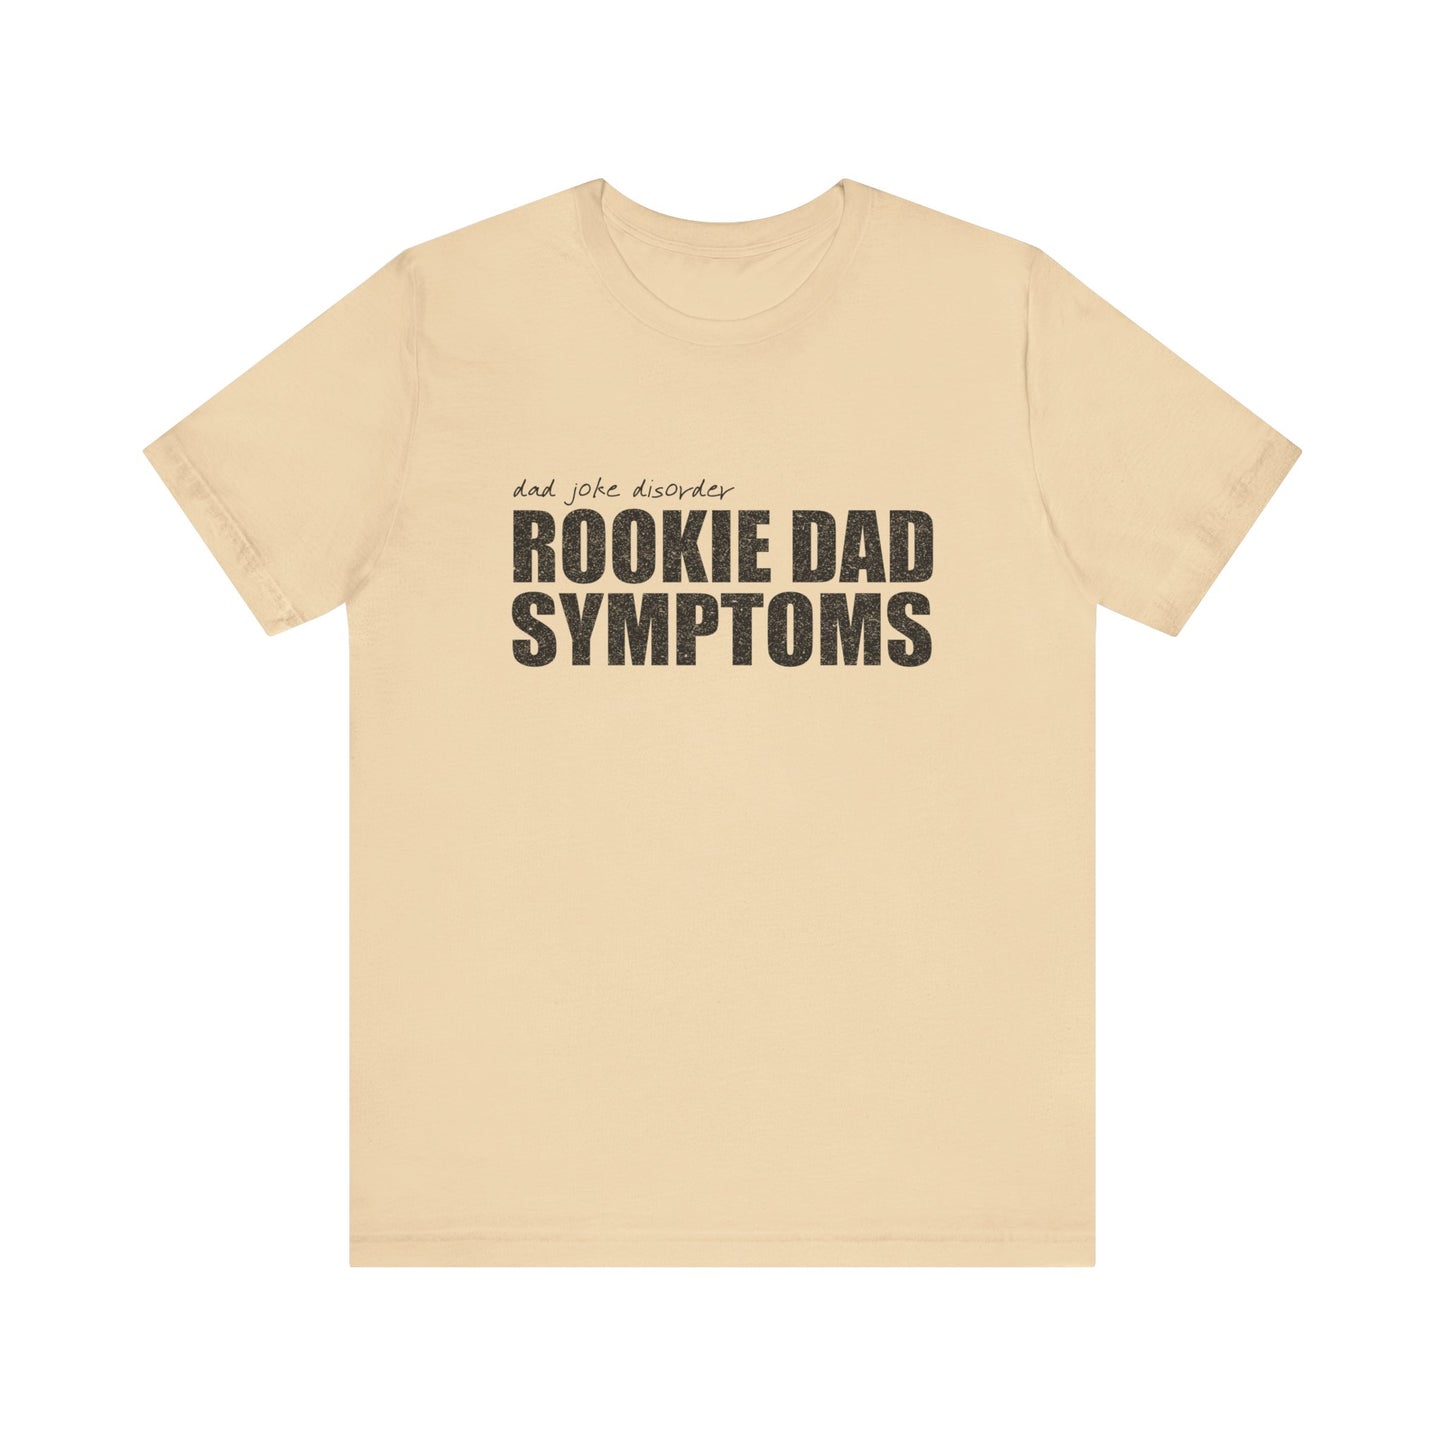 Rookie Dad Symptoms Shirt, New Dad Shirt, Father's Day Gift, Gift for New Born Dad, Gift for husband, Funny Dad Tee, First Time Father Shirt